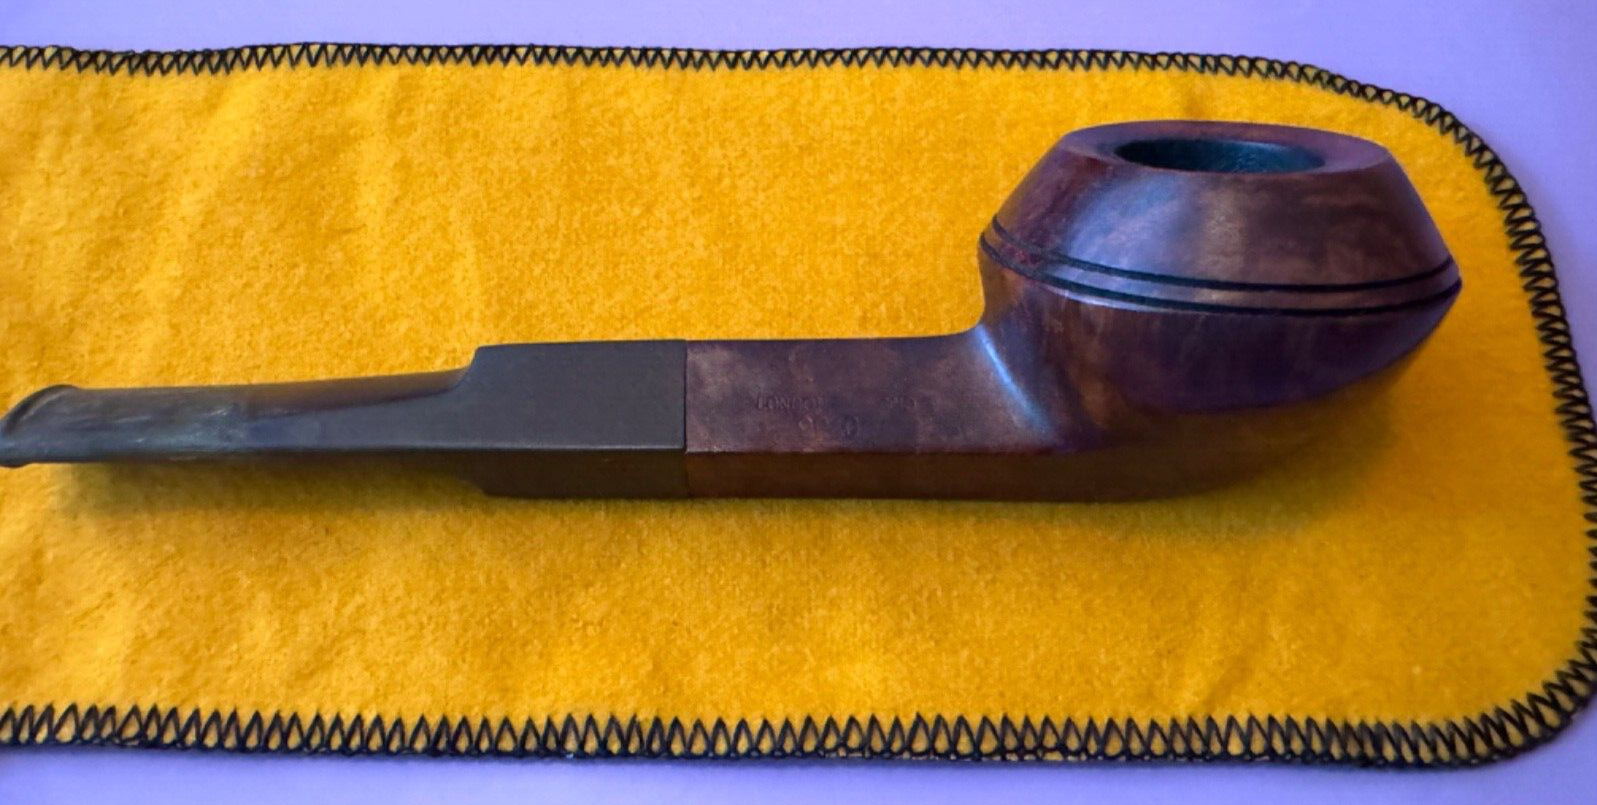 GBD New Standard 9240 London Made Smoking Pipe Gold Pouch Vintage England J